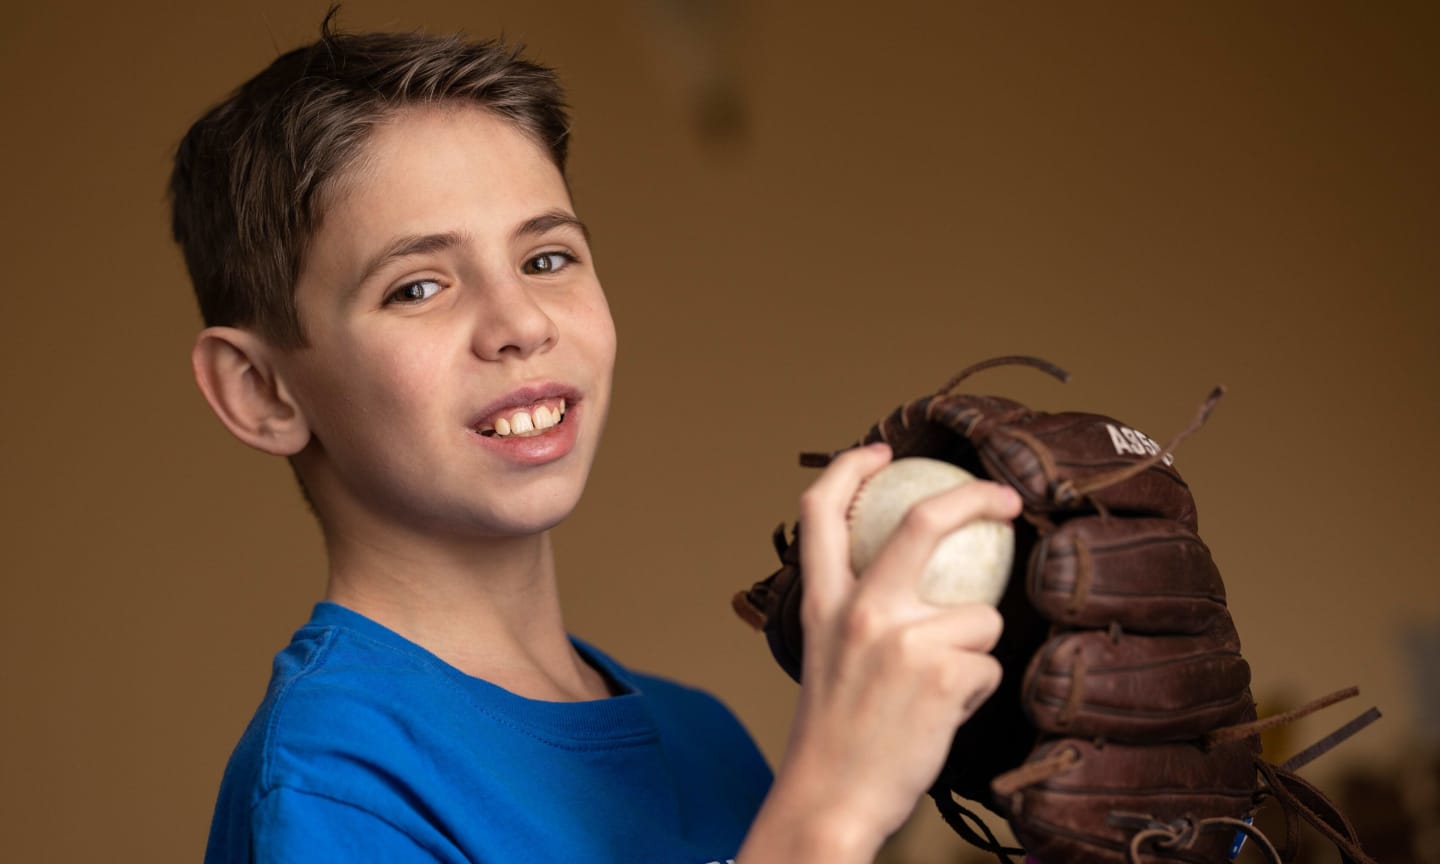 Will Andrews smiling, wearing a baseball glove